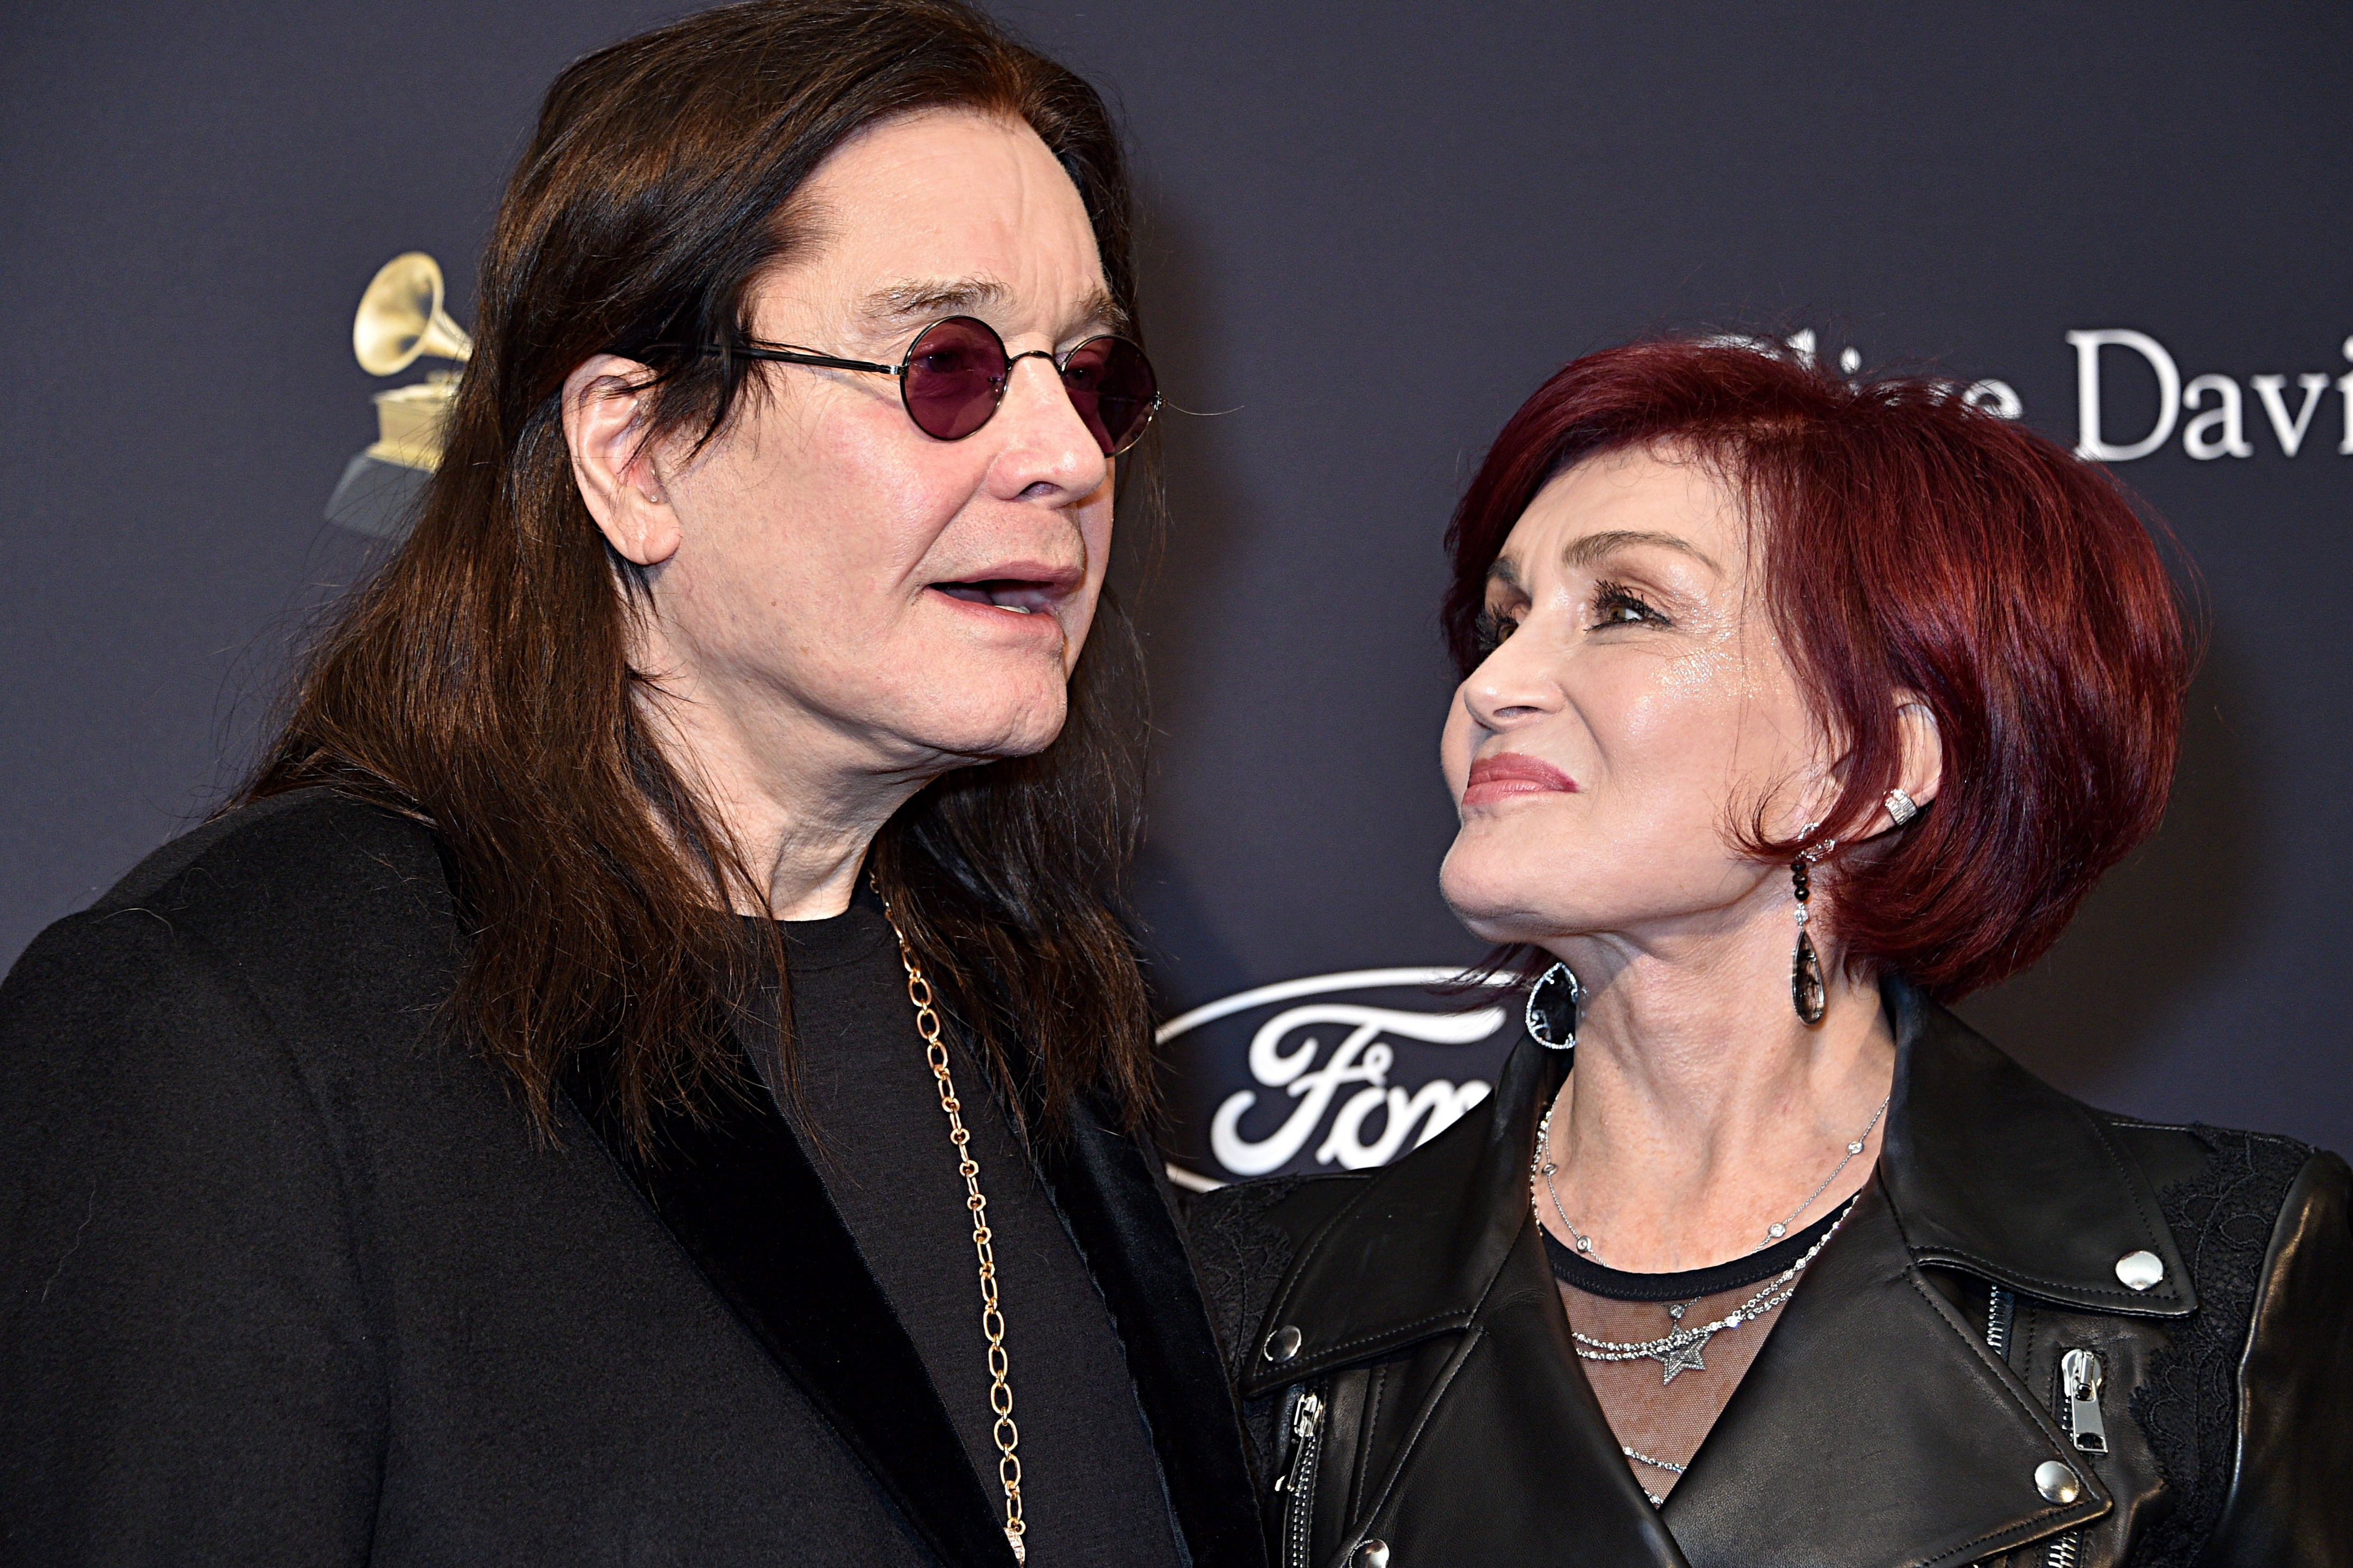 Ozzy said he got a ‘reality check’ after Sharon called for a time-out on their relationship